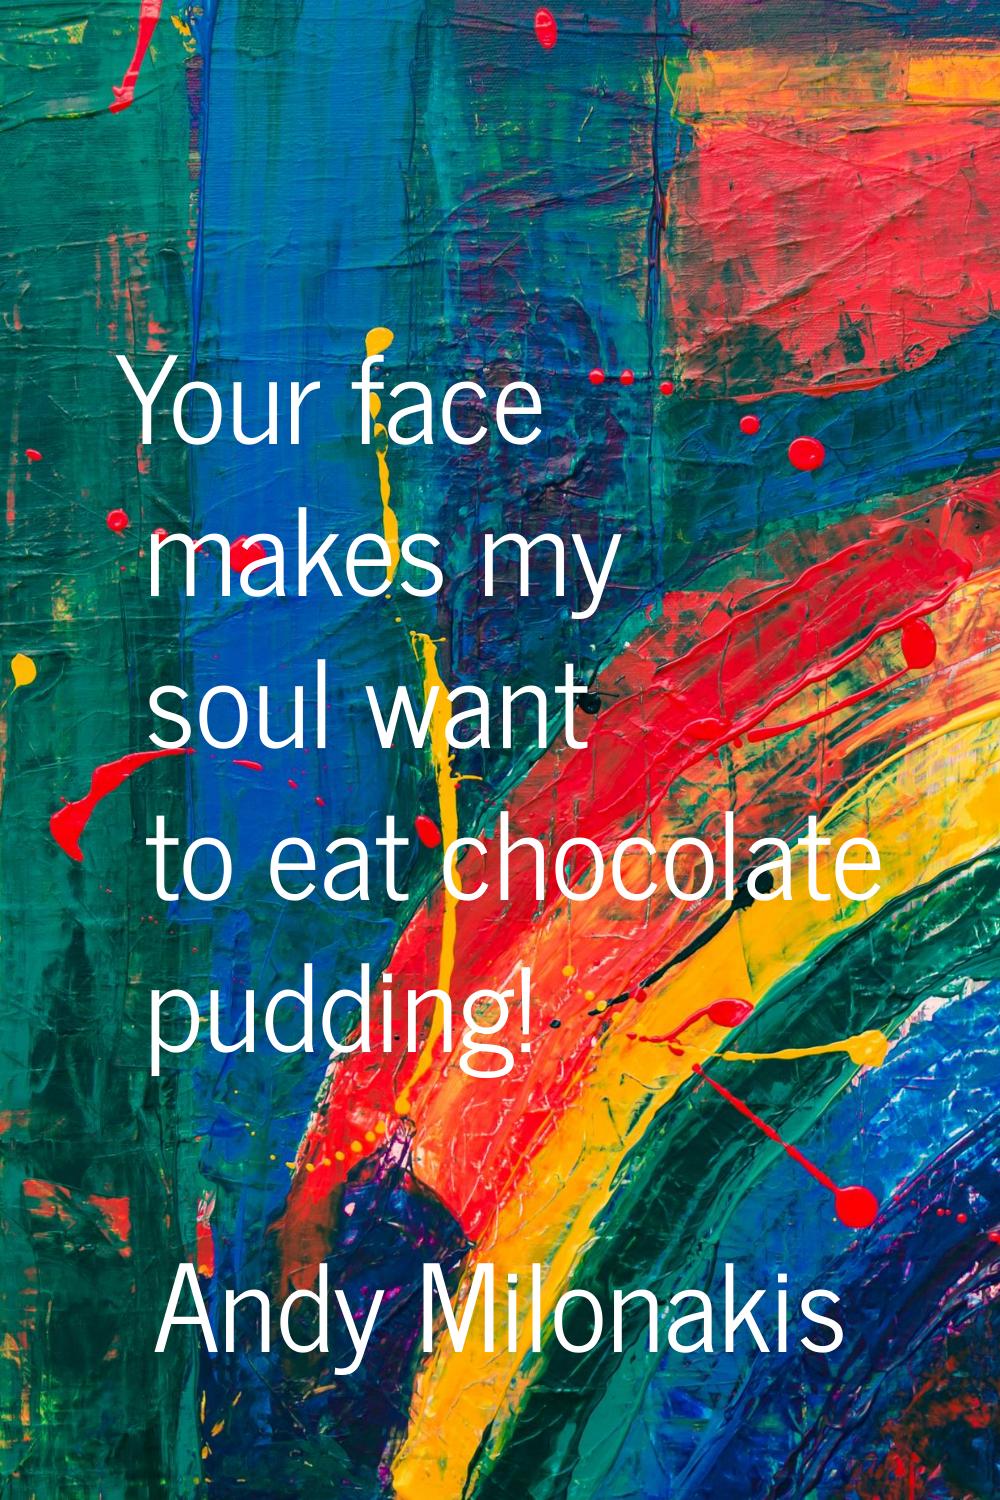 Your face makes my soul want to eat chocolate pudding!